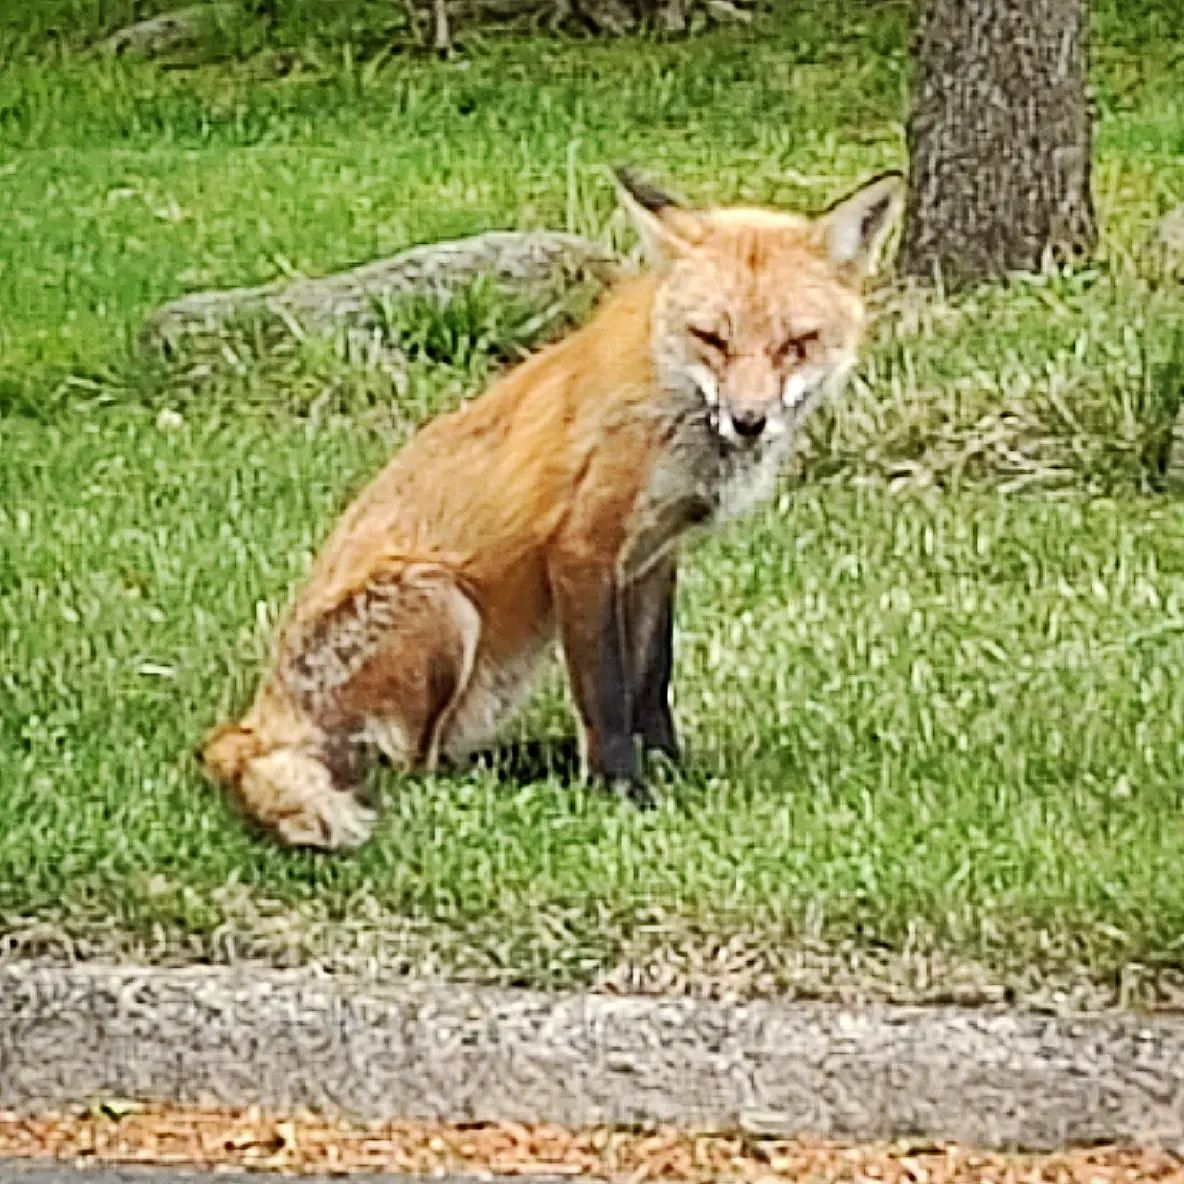 Samson and I crossed paths with this young vixen on an early morning walk
#redfox #fox